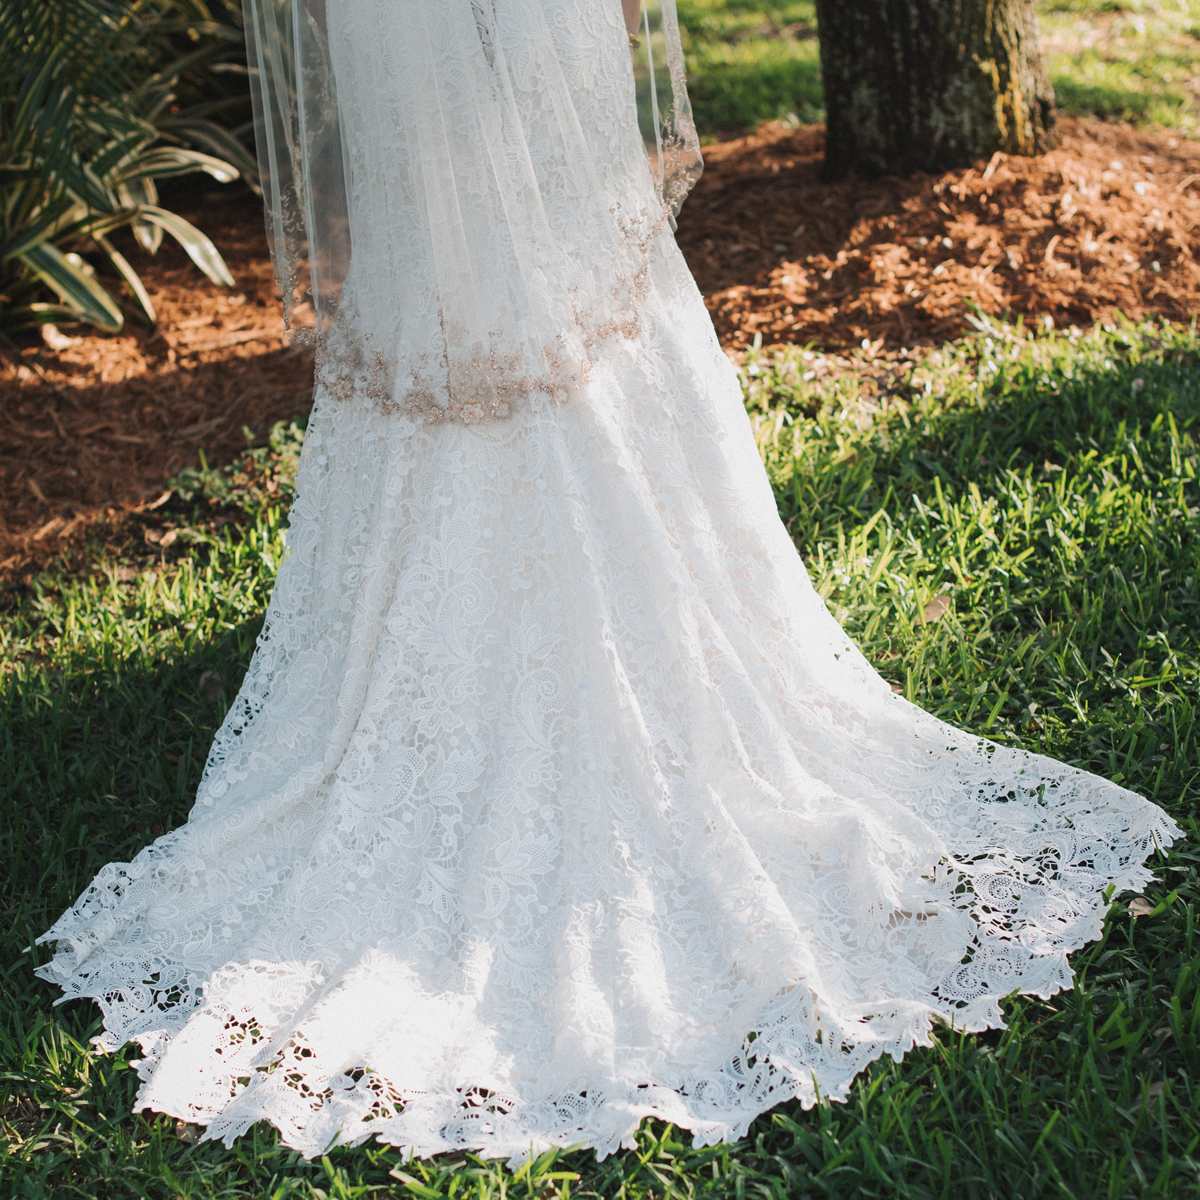 Stunning Lace Bridal Gown | The Majestic Vision Wedding Planning | Palm Beach, FL | www.themajesticvision.com | Robert Madrid Photography